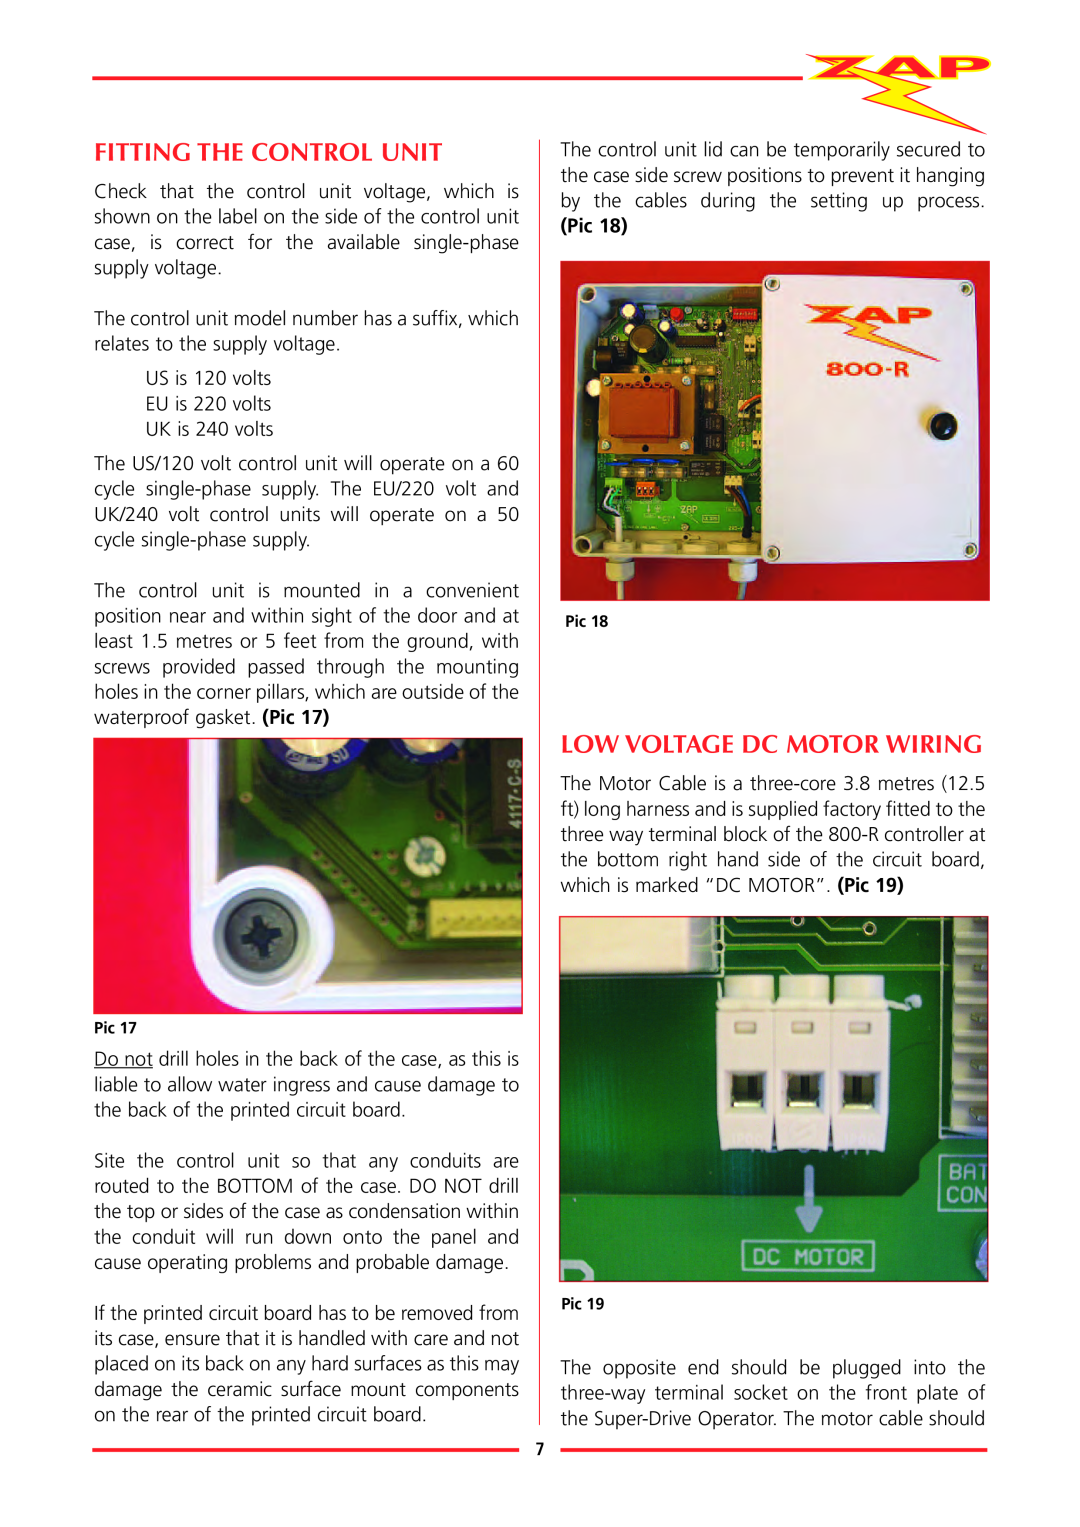 Zap 815-RL installation instructions Fitting The Control Unit, Low Voltage Dc Motor Wiring 